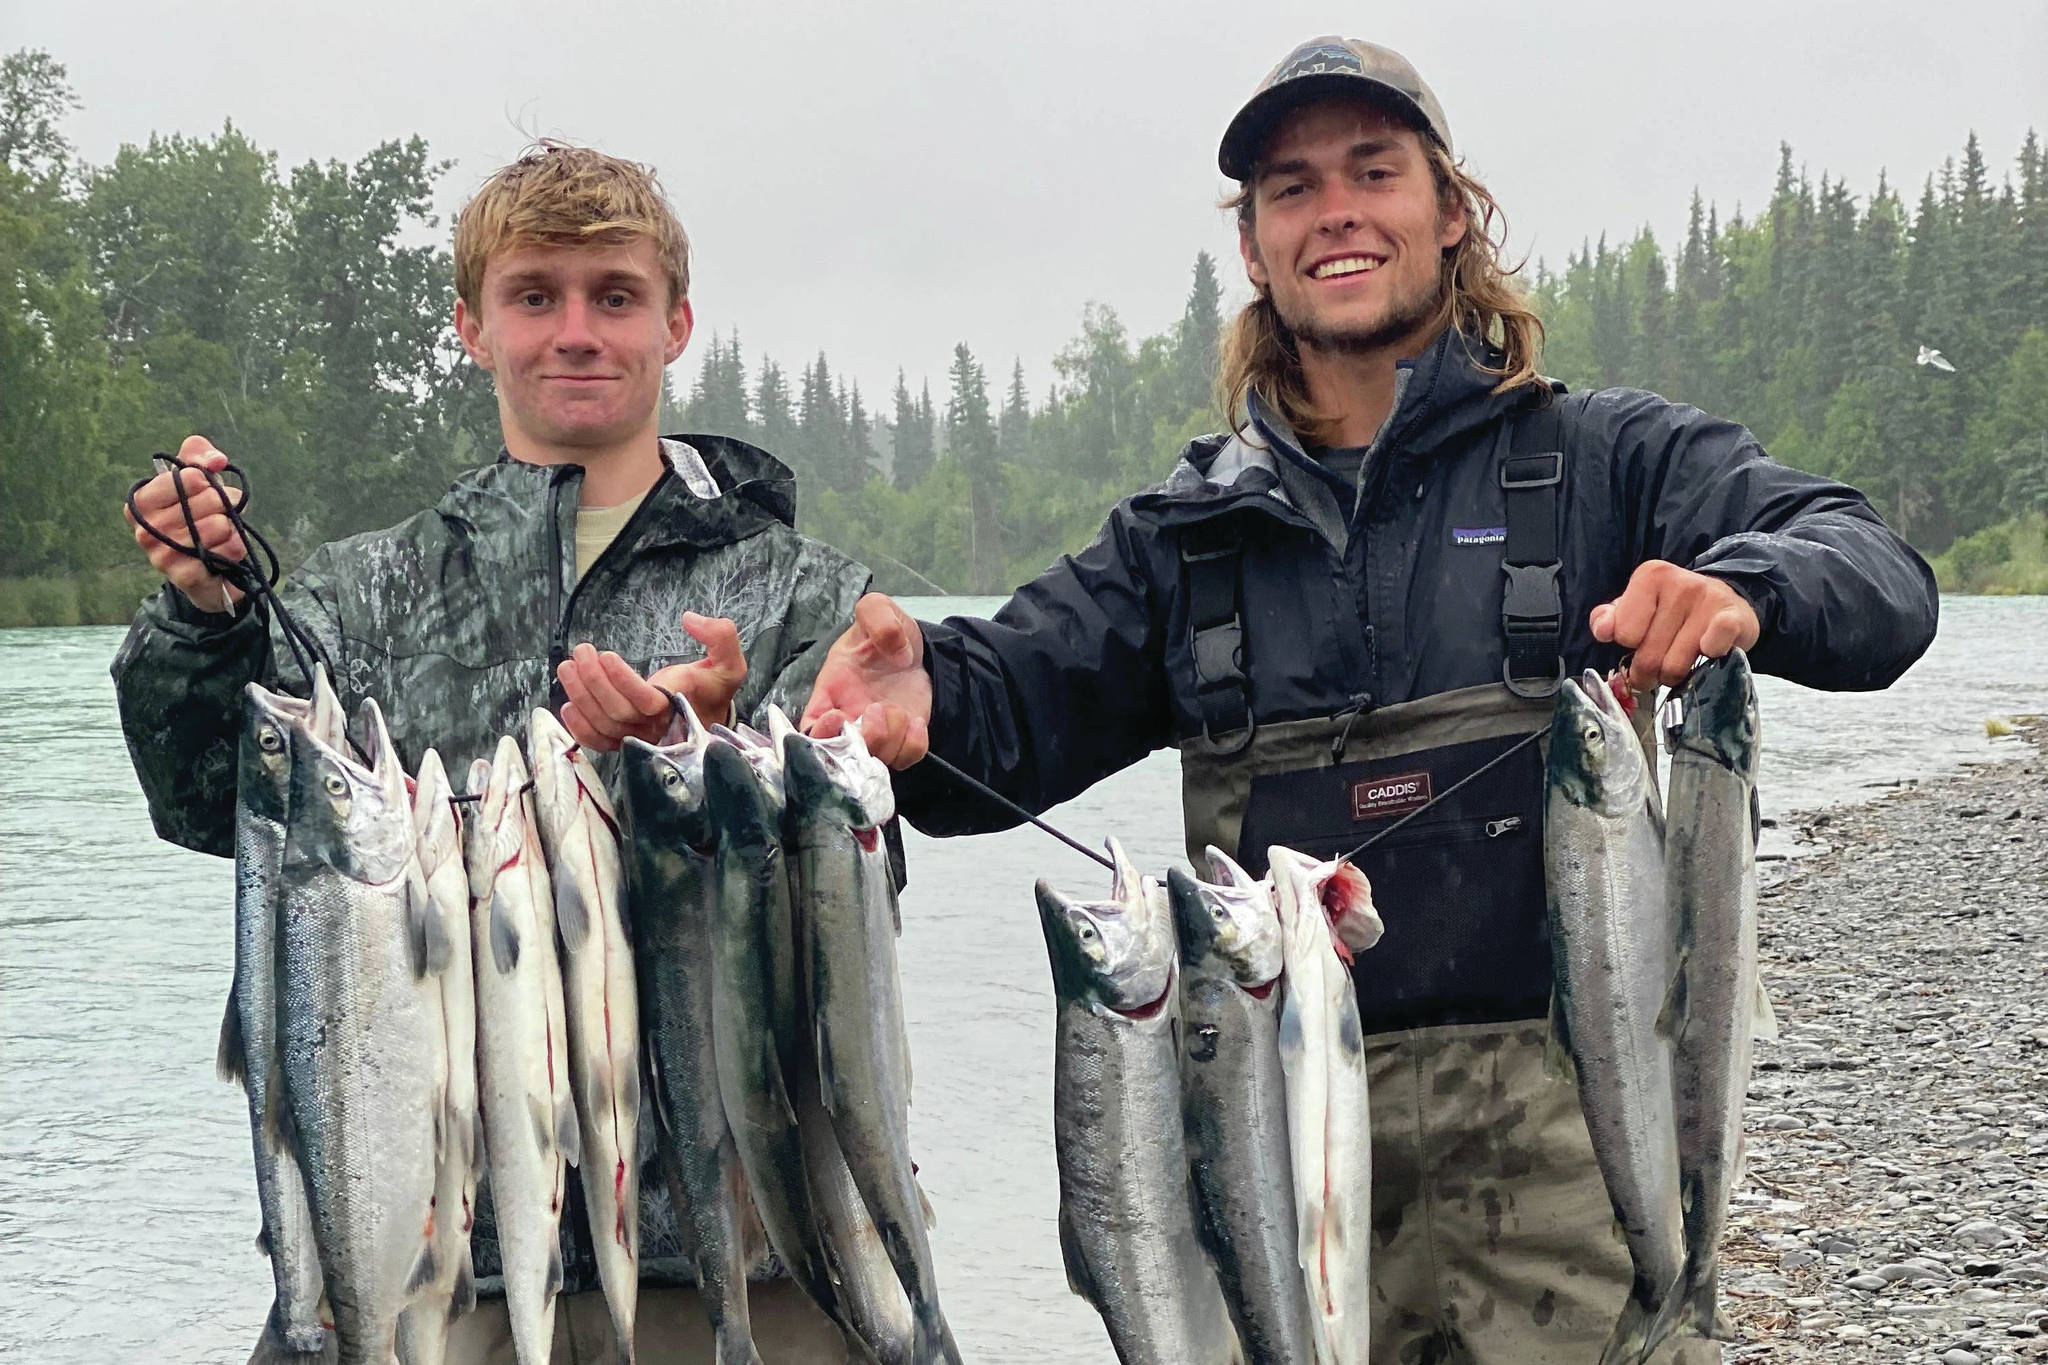 Daniel Balserak and Luke Konson fish for salmon in Alaska. The pair has been traveling the country and catching every official state fish for the past 11 months. (Photo provided)